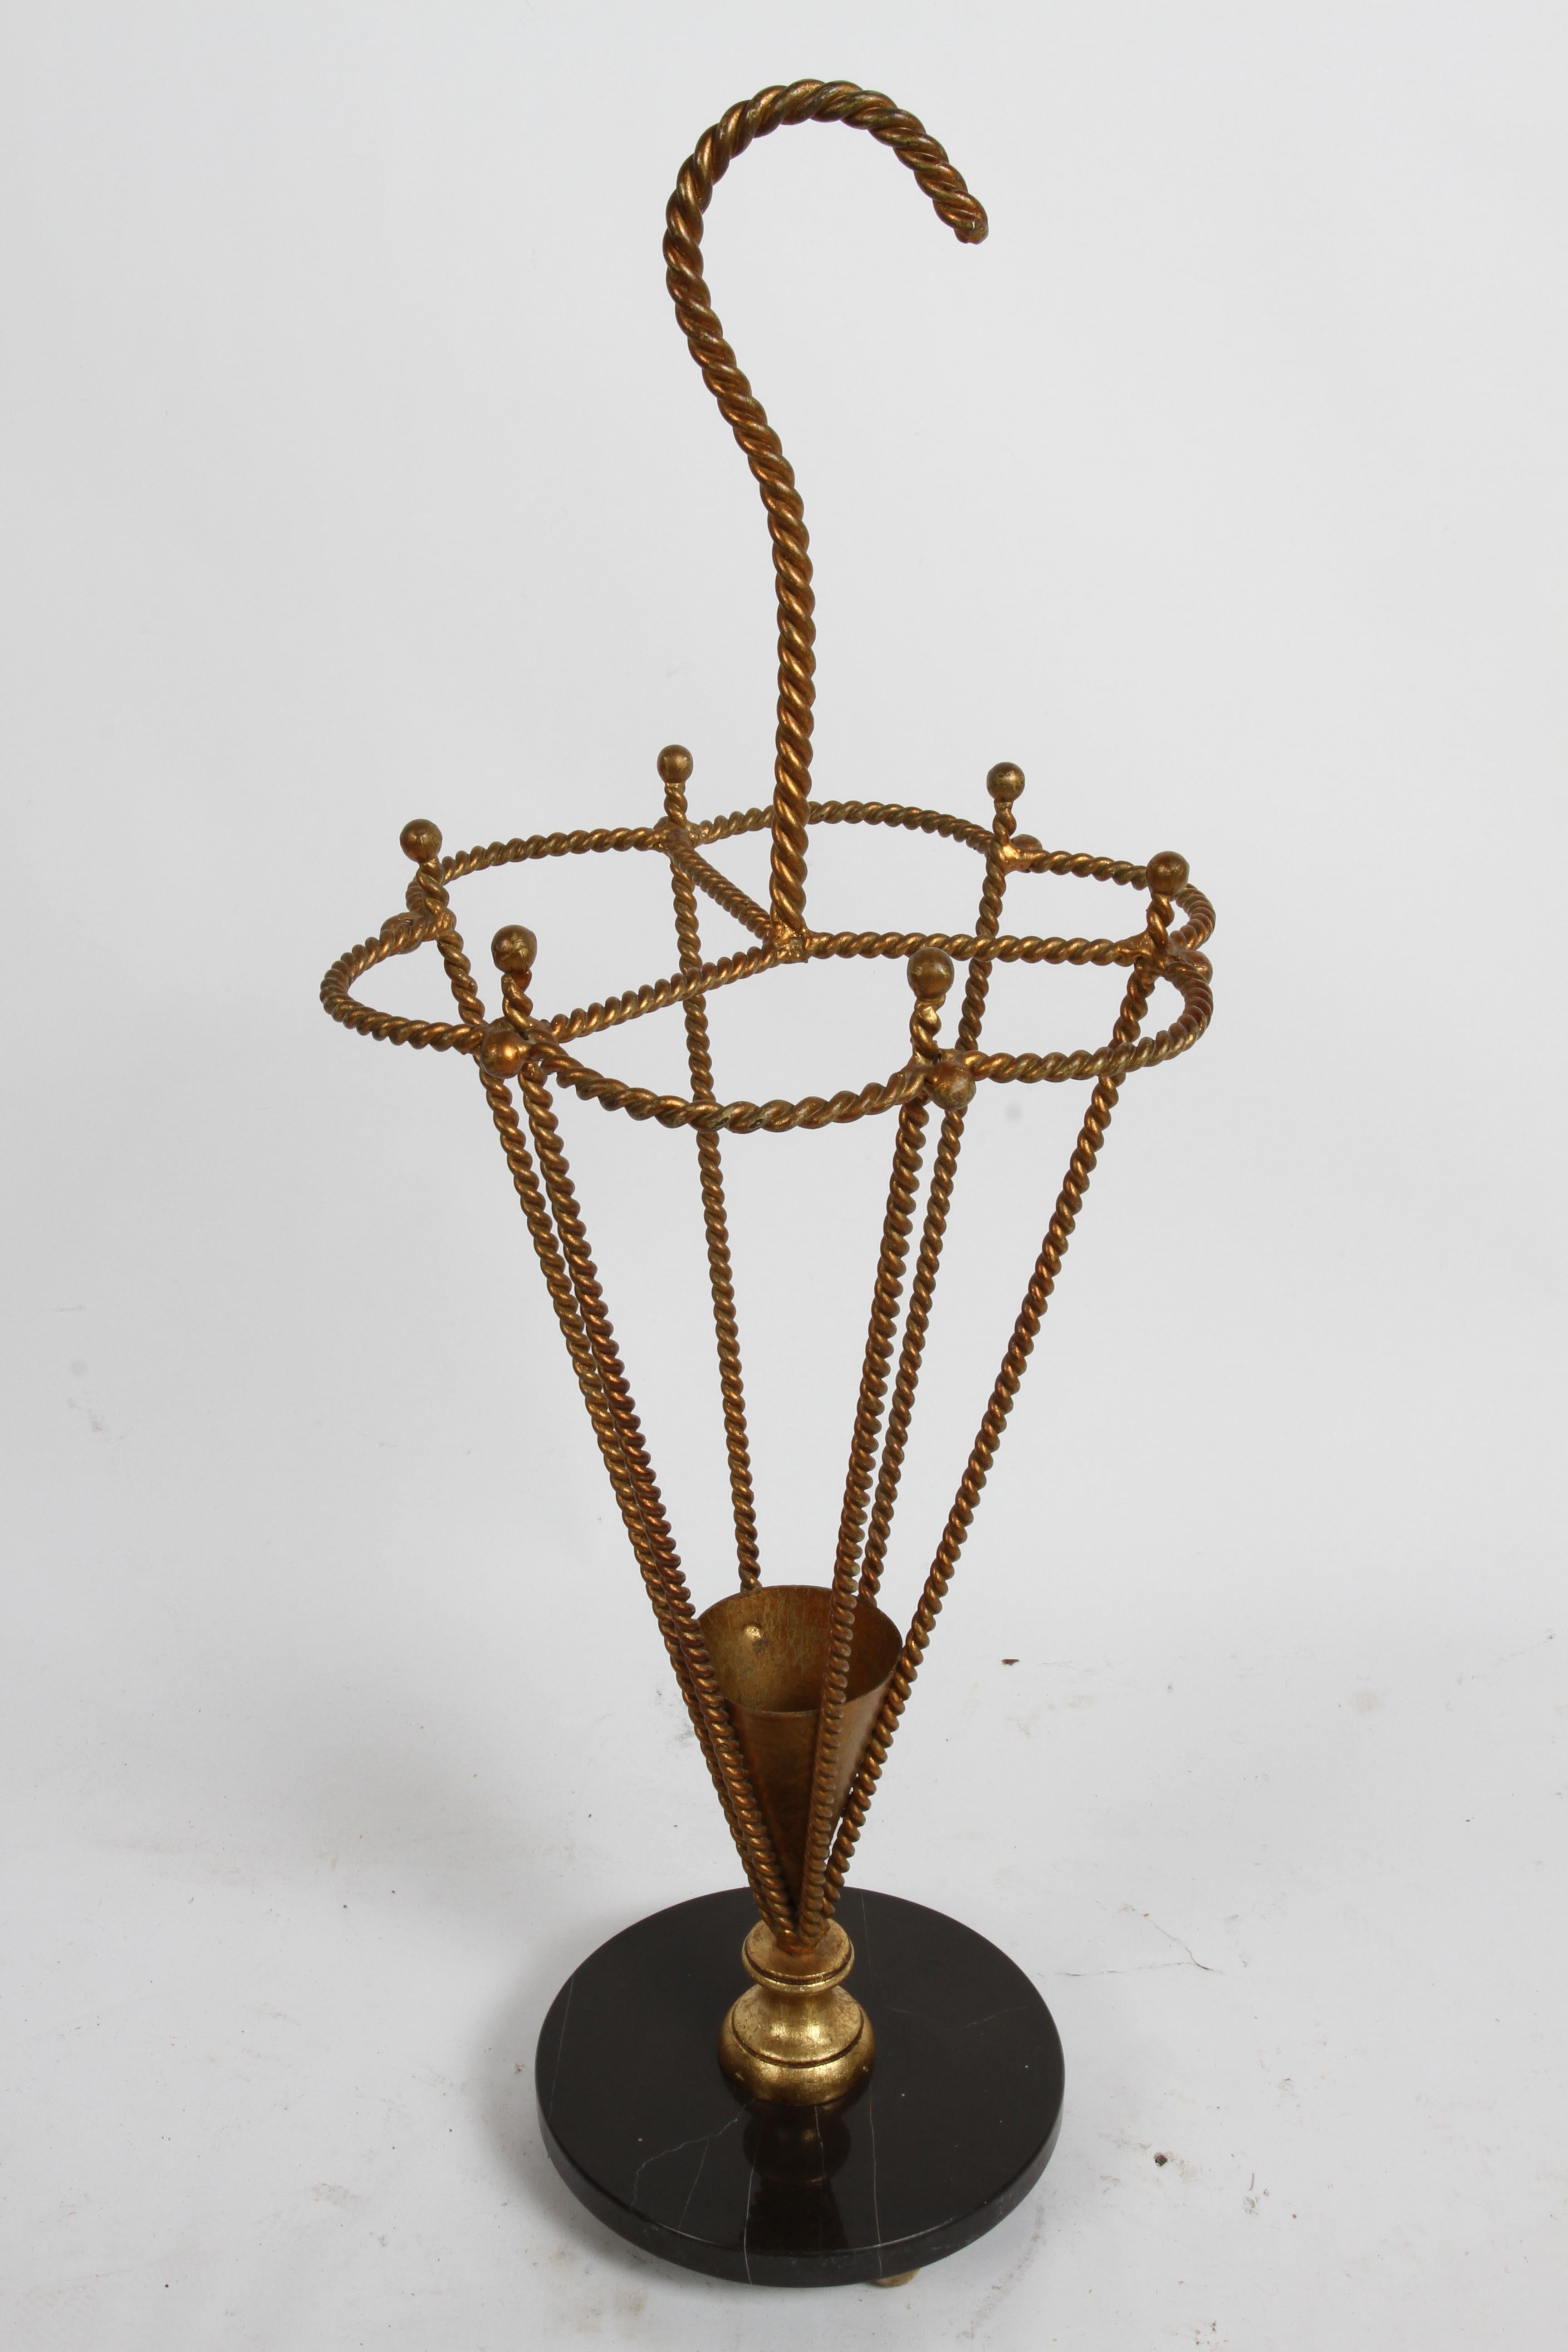 Vintage umbrella or cane stand, Italian made, takes form of an Umbrella, made of iron twisted rope with gold gilt and black marble base on brass ball feet. Light patina, light wear or loss to handle. Very well made.